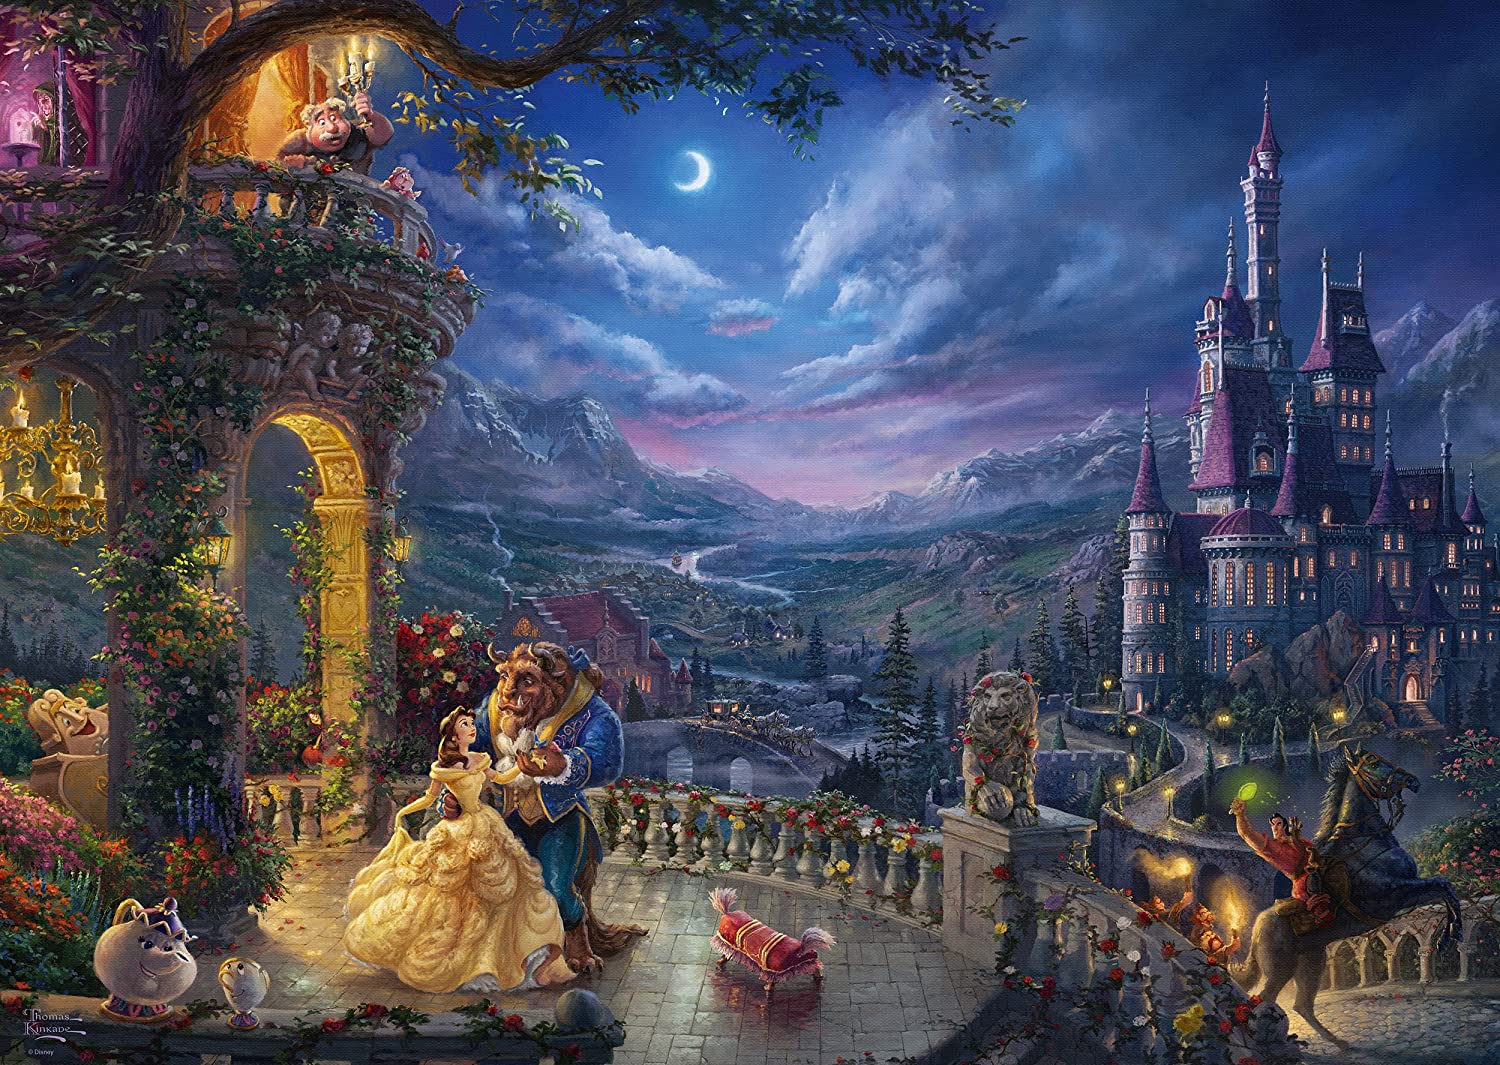 Puzzle Kinkade: The Beauty And the Beast